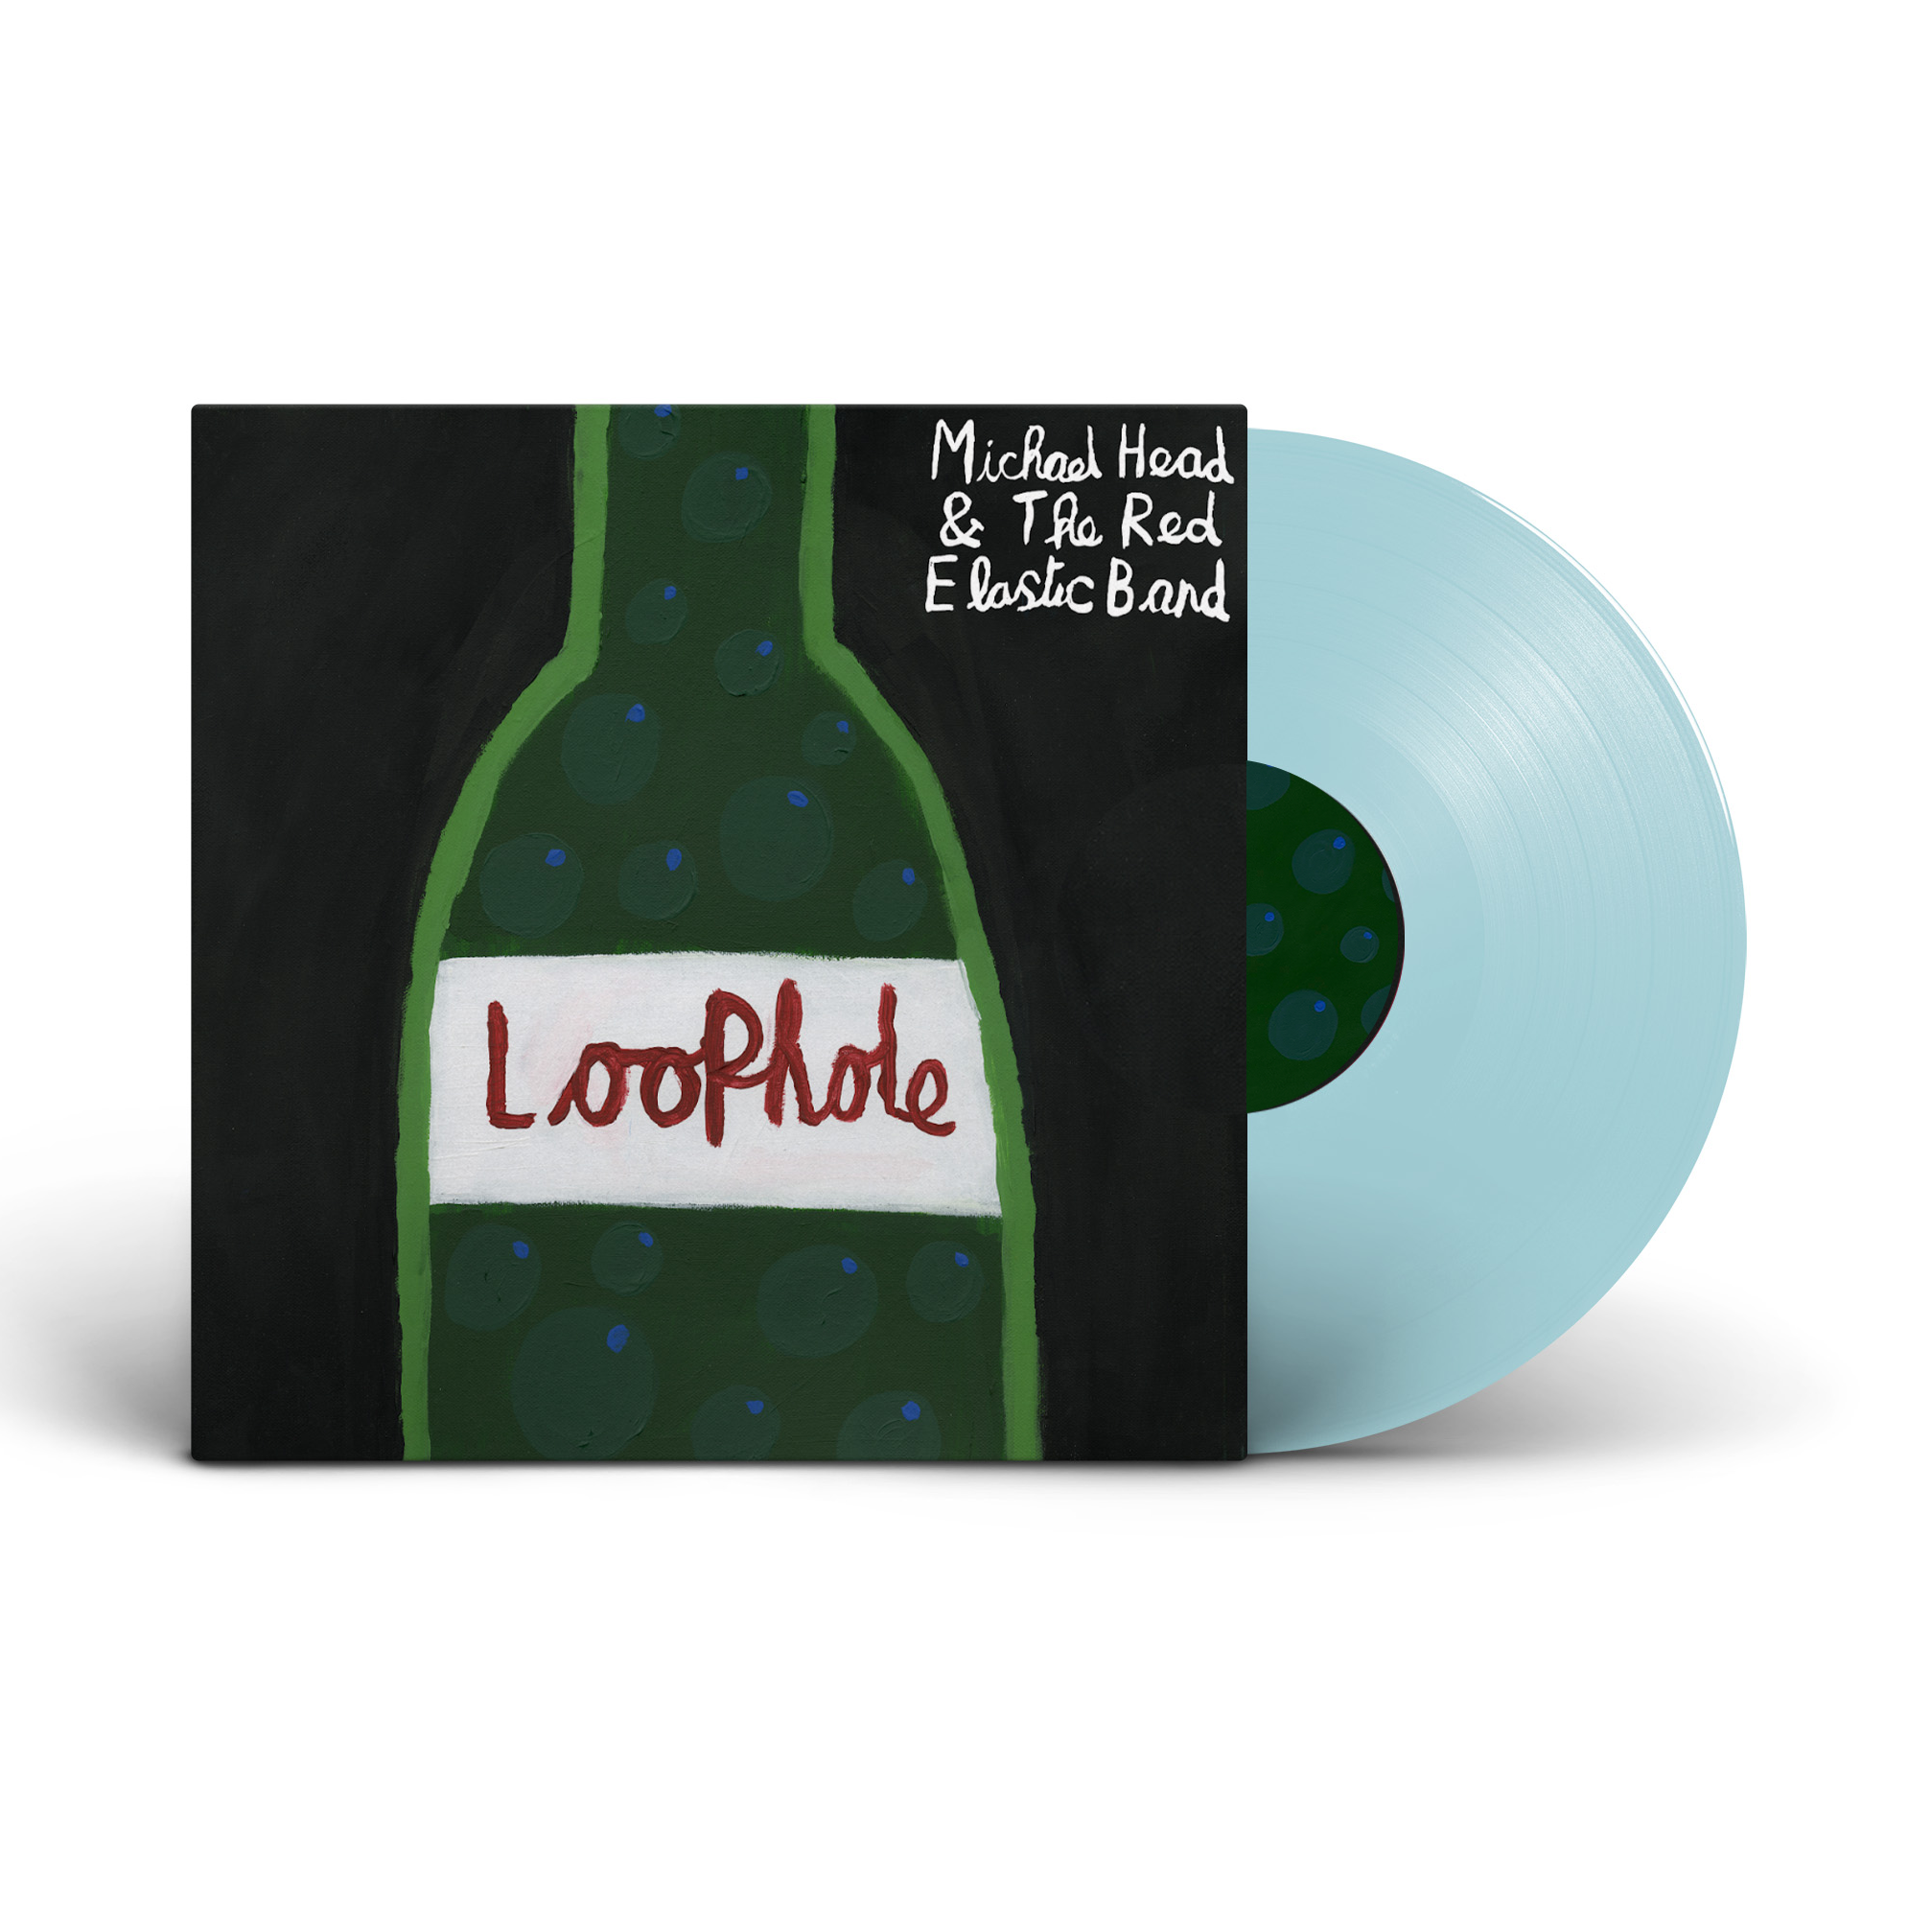 Michael Head & The Red Elastic Band - Loophole: Limited Light Blue Vinyl LP